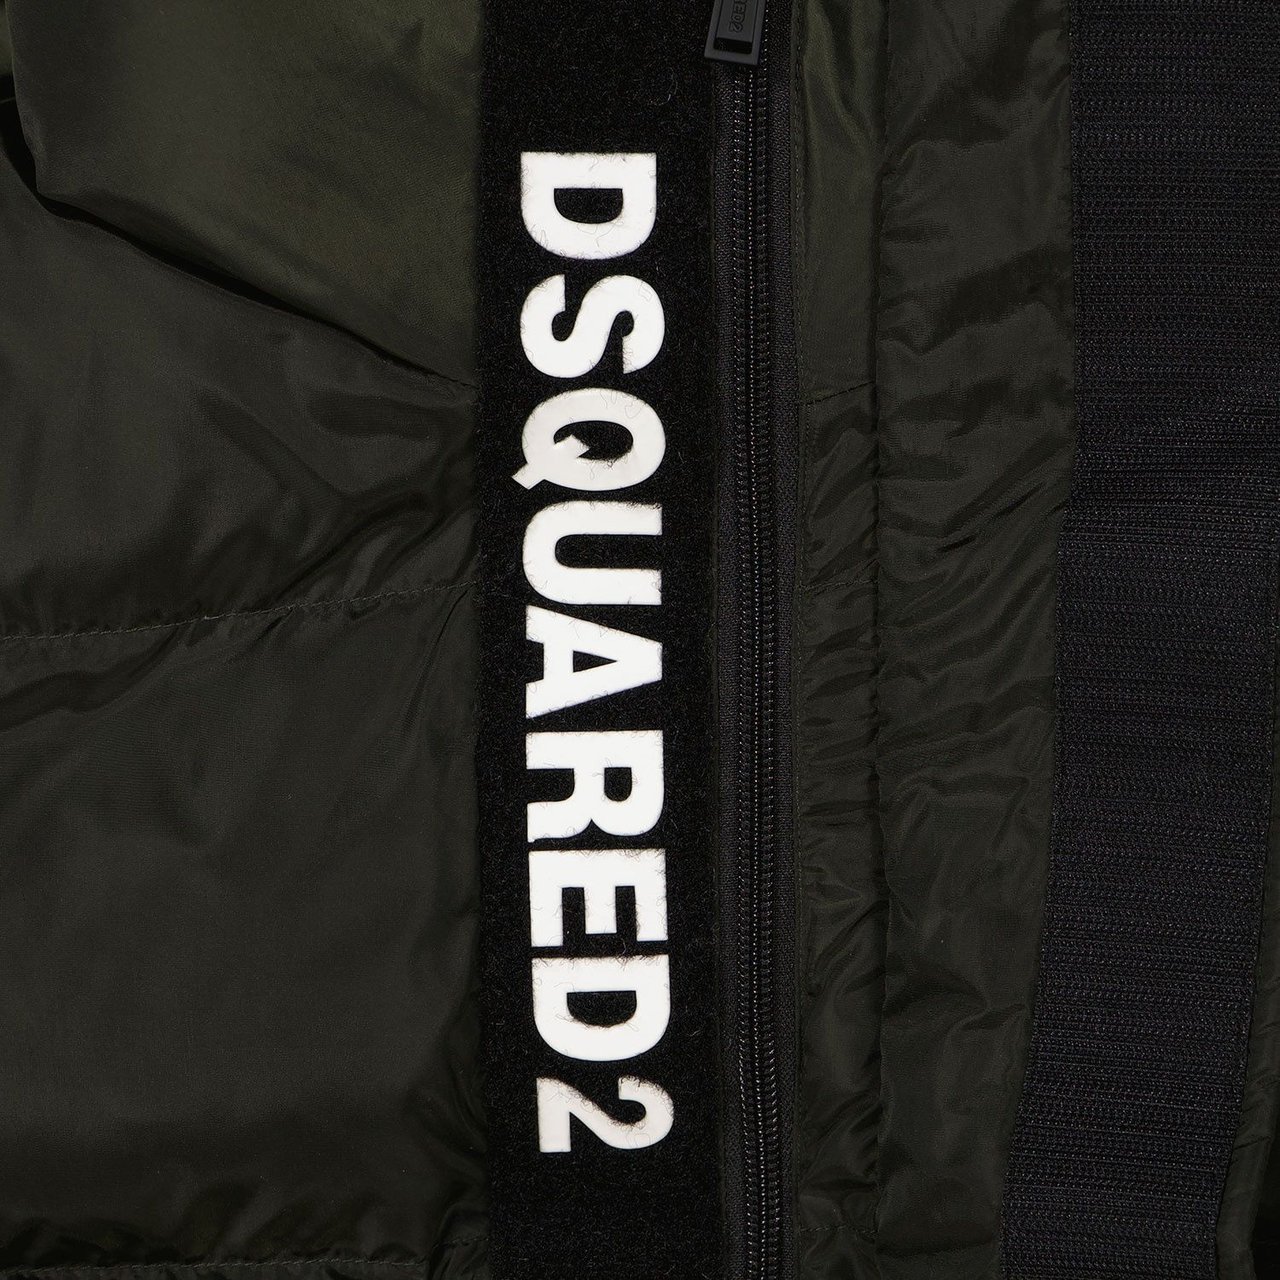 Dsquared2 Dsquared2 DQ1090 kinderjas army Groen